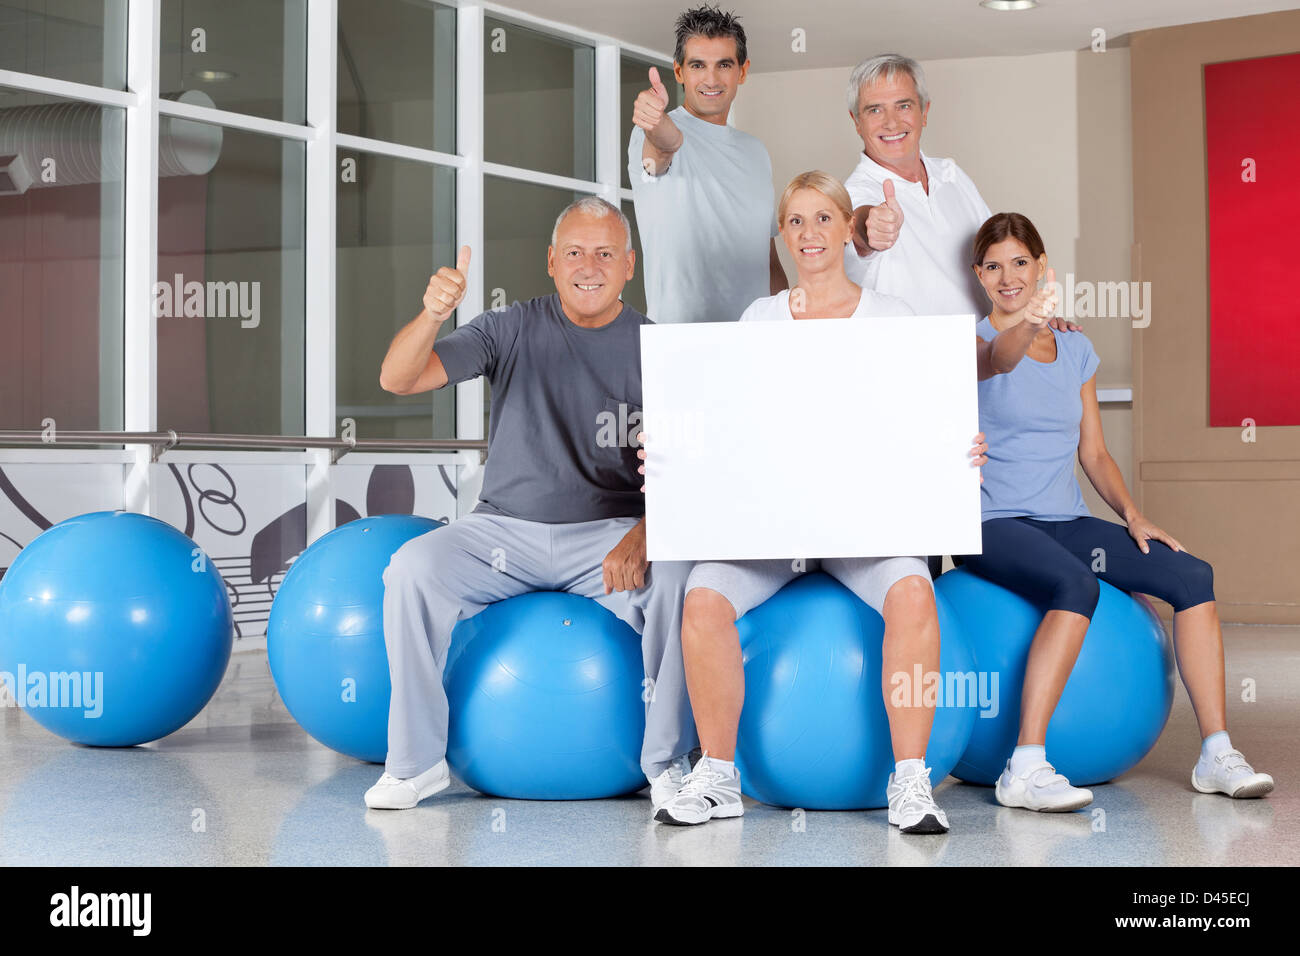 Simple Exercises for Older Adults, Active Seniors